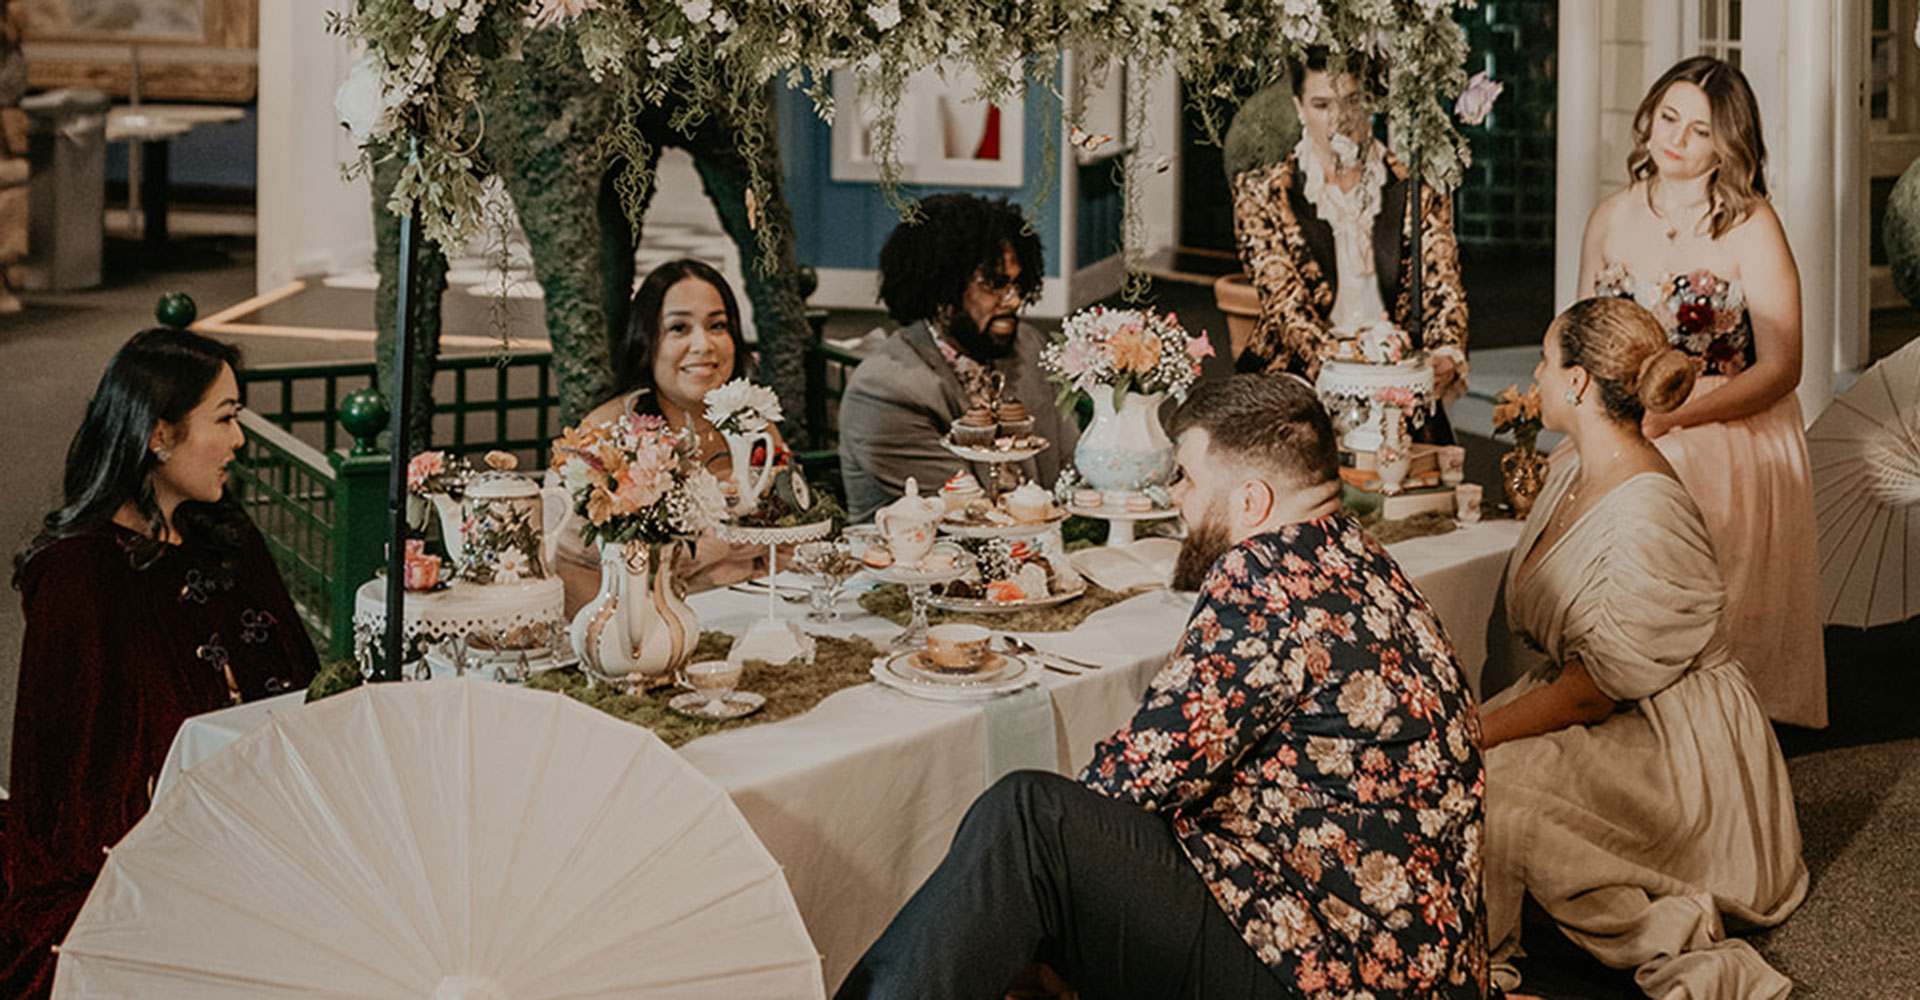 People sitting around a table set for a lavish picnic.